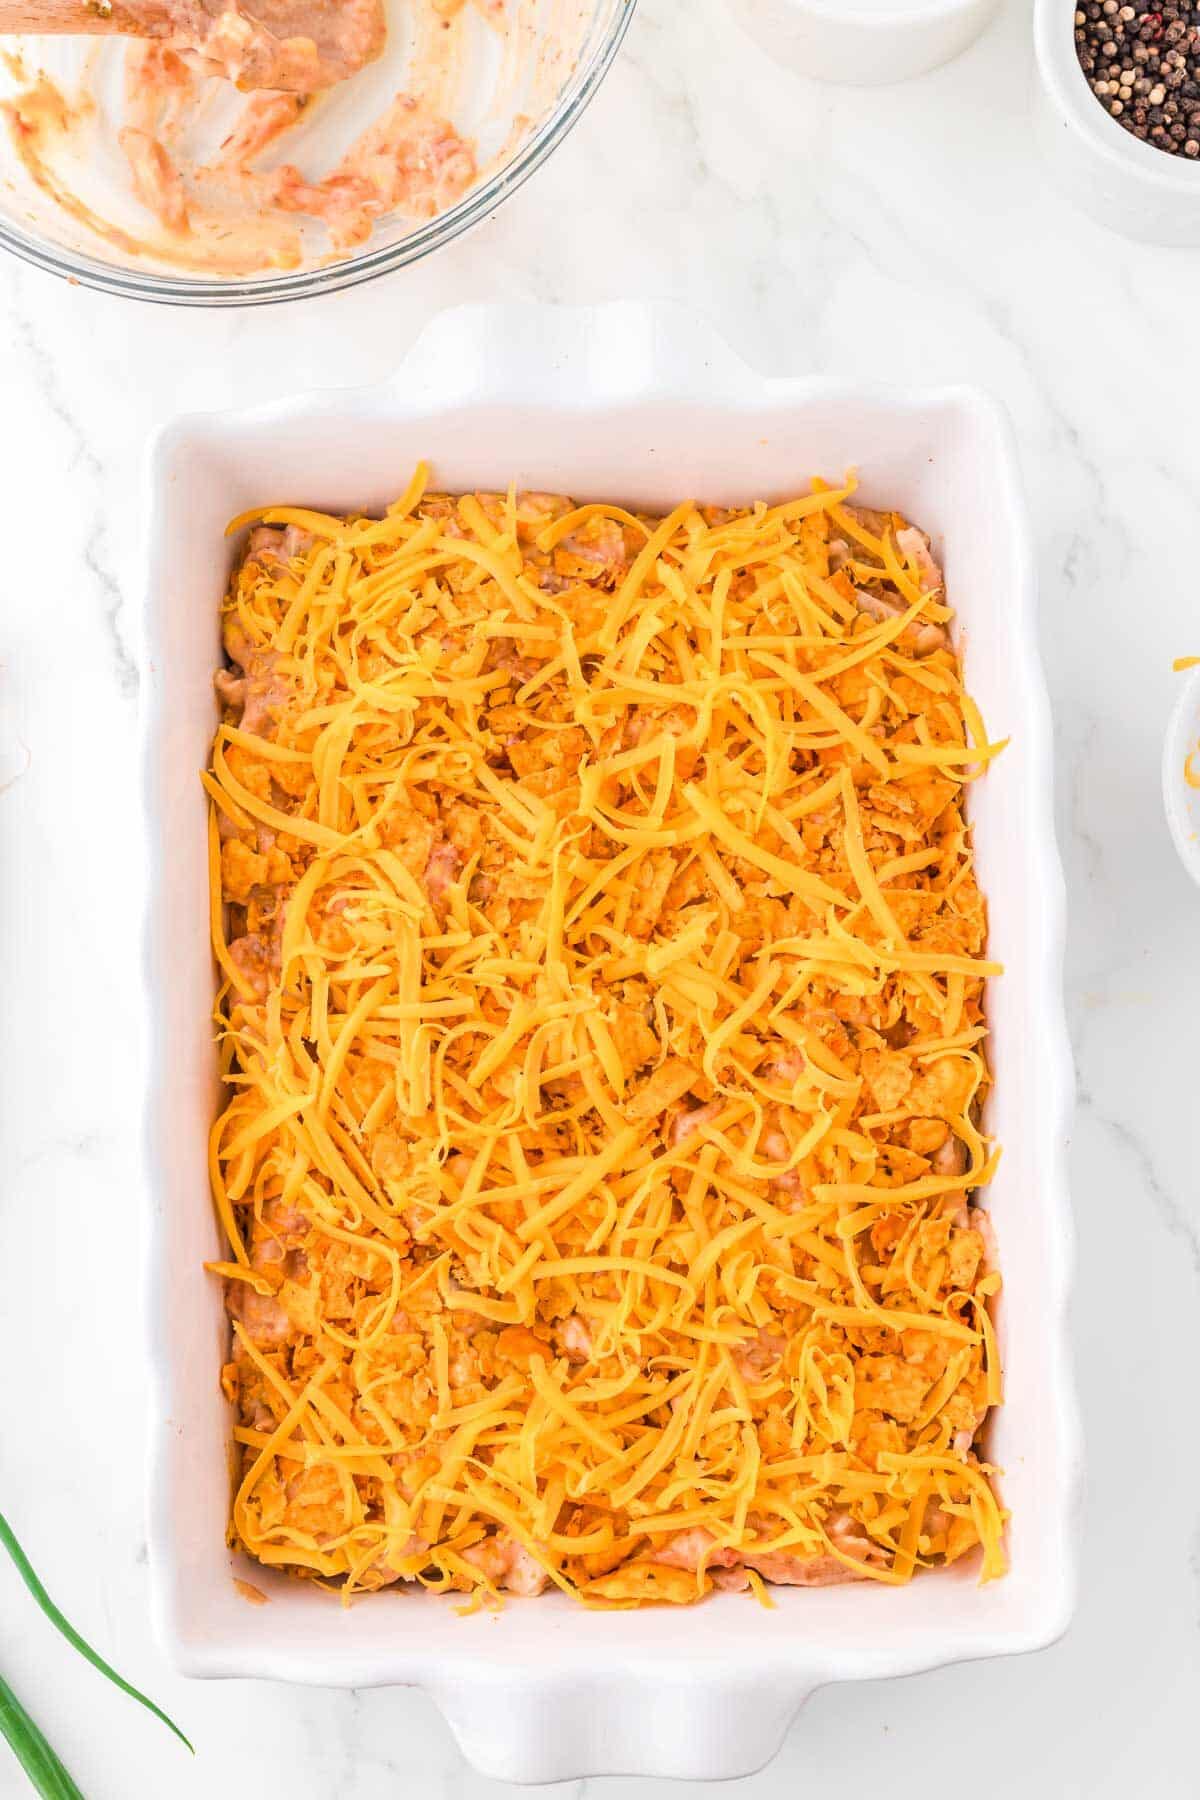 Doritos chicken casserole topped with cheese before being baked.